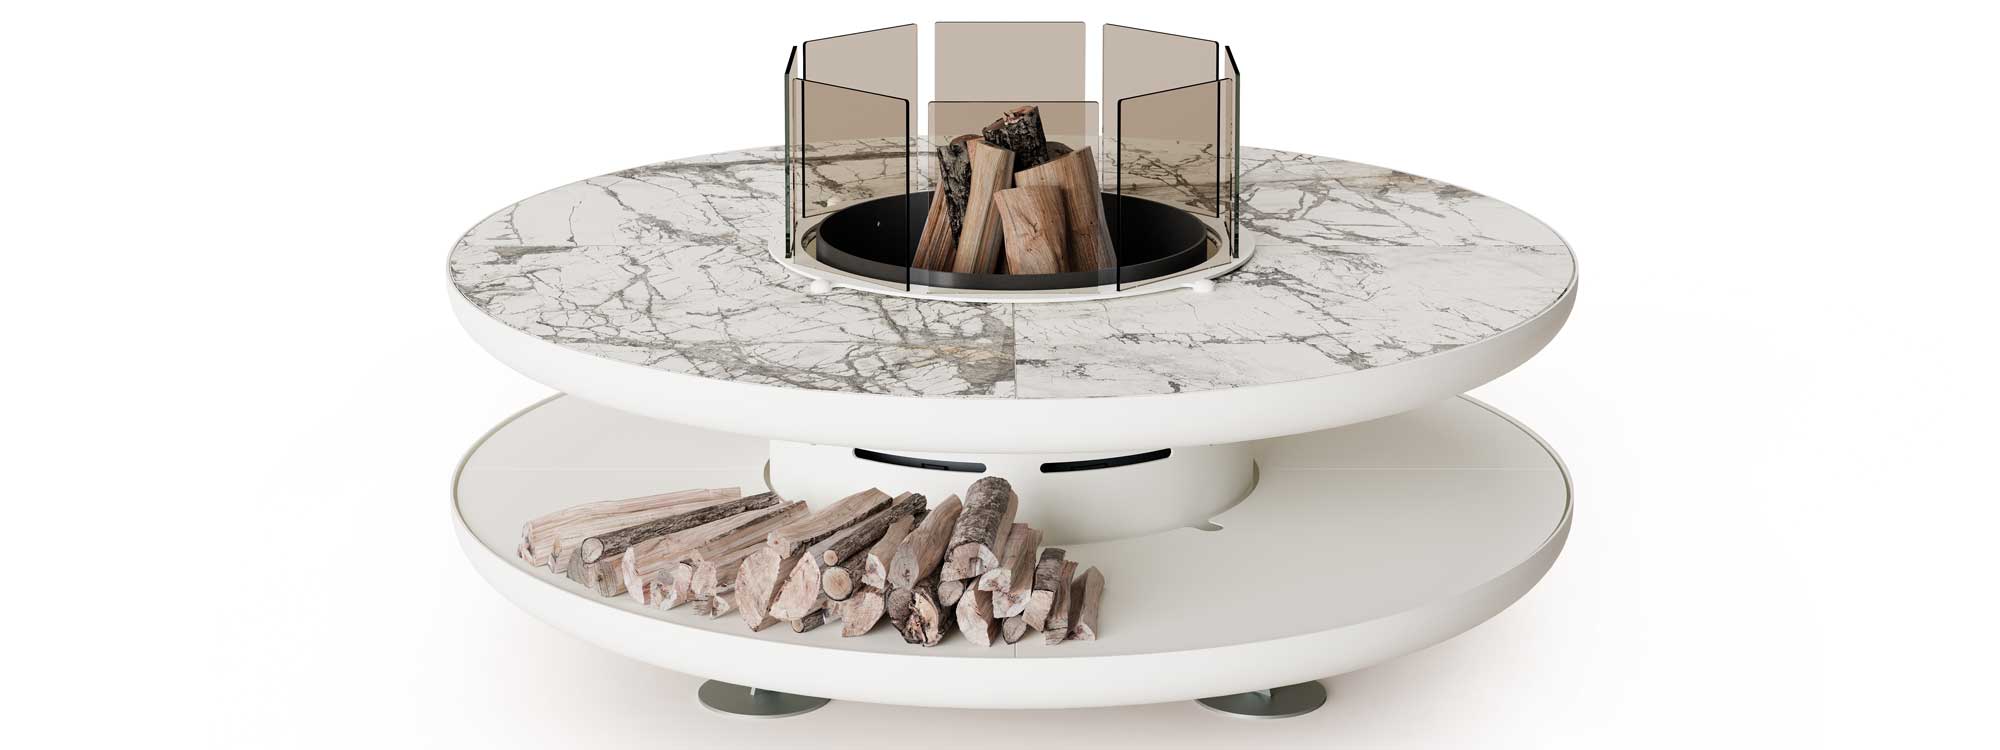 Studio image of Moon Plus large circular fire pit with Imperial Grey marble-effect ceramic top & smoked glass fire screen panels by AK47 Design Italy.